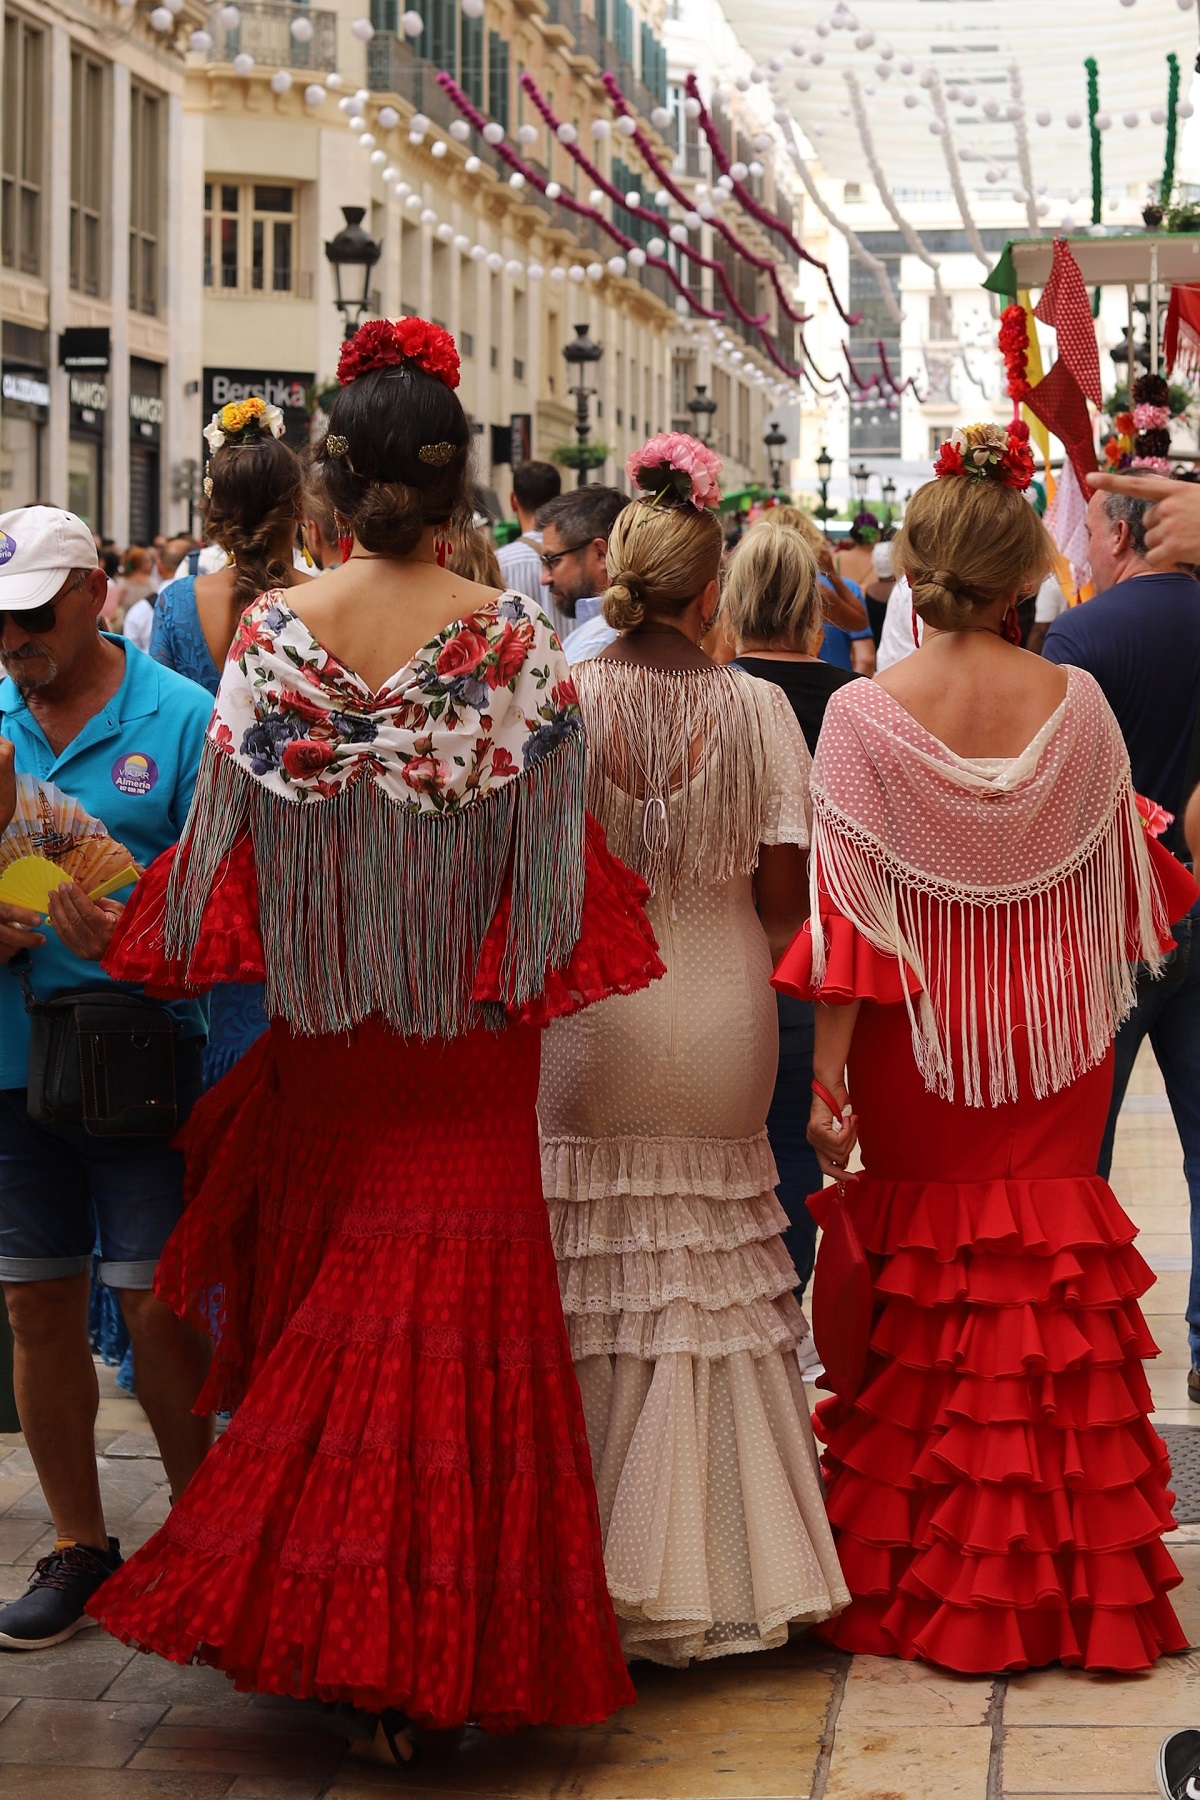 Shot following three women dressed in flamenco dresses down a street decorated with paper balls for feria